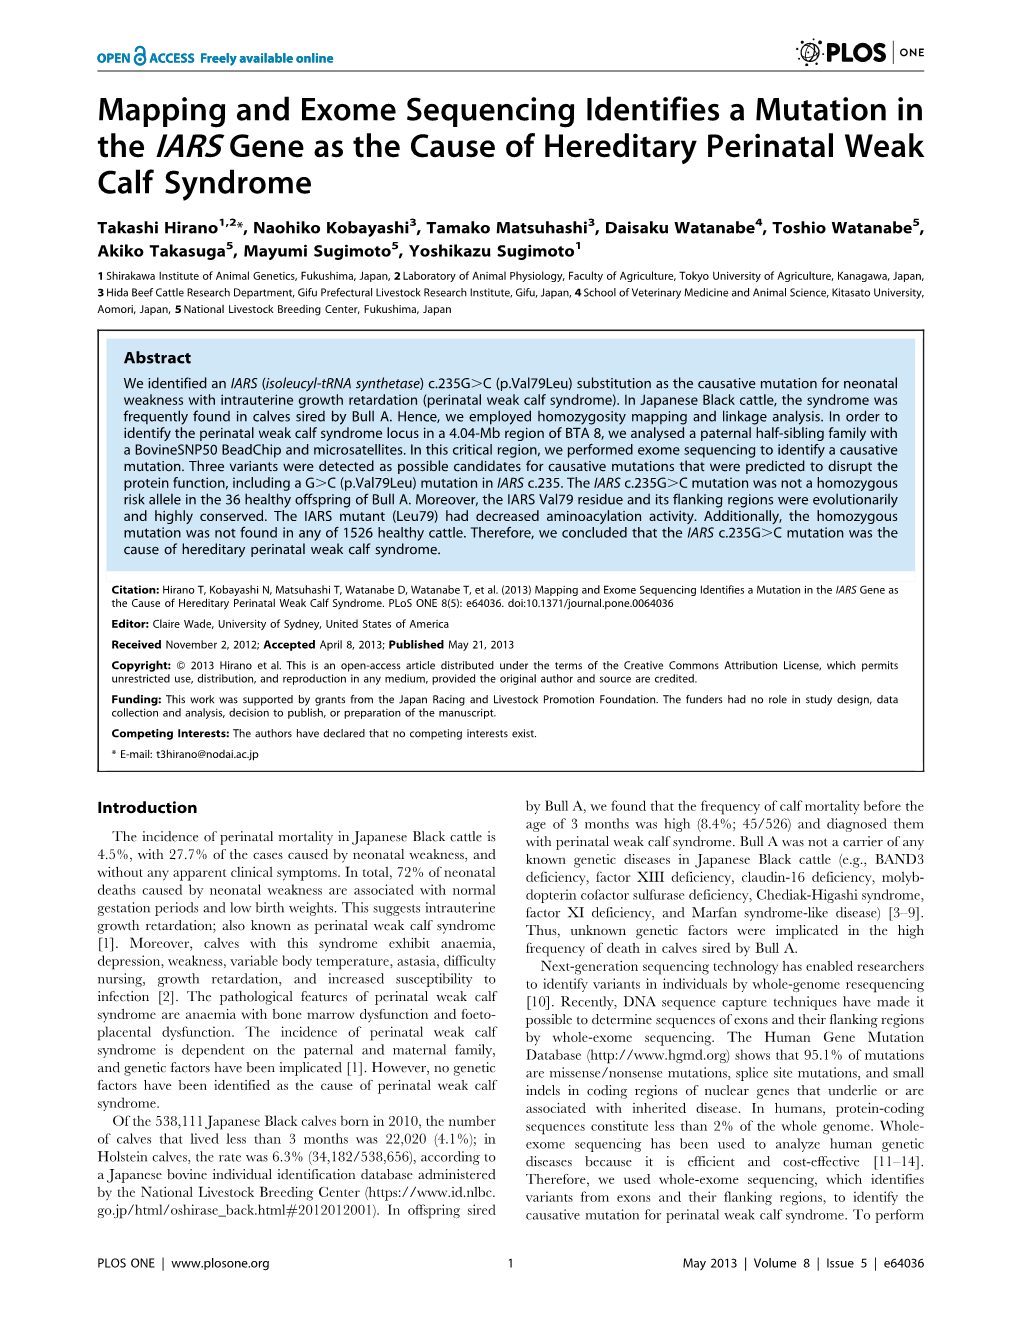 Mapping and Exome Sequencing Identifies a Mutation in the IARS Gene As the Cause of Hereditary Perinatal Weak Calf Syndrome